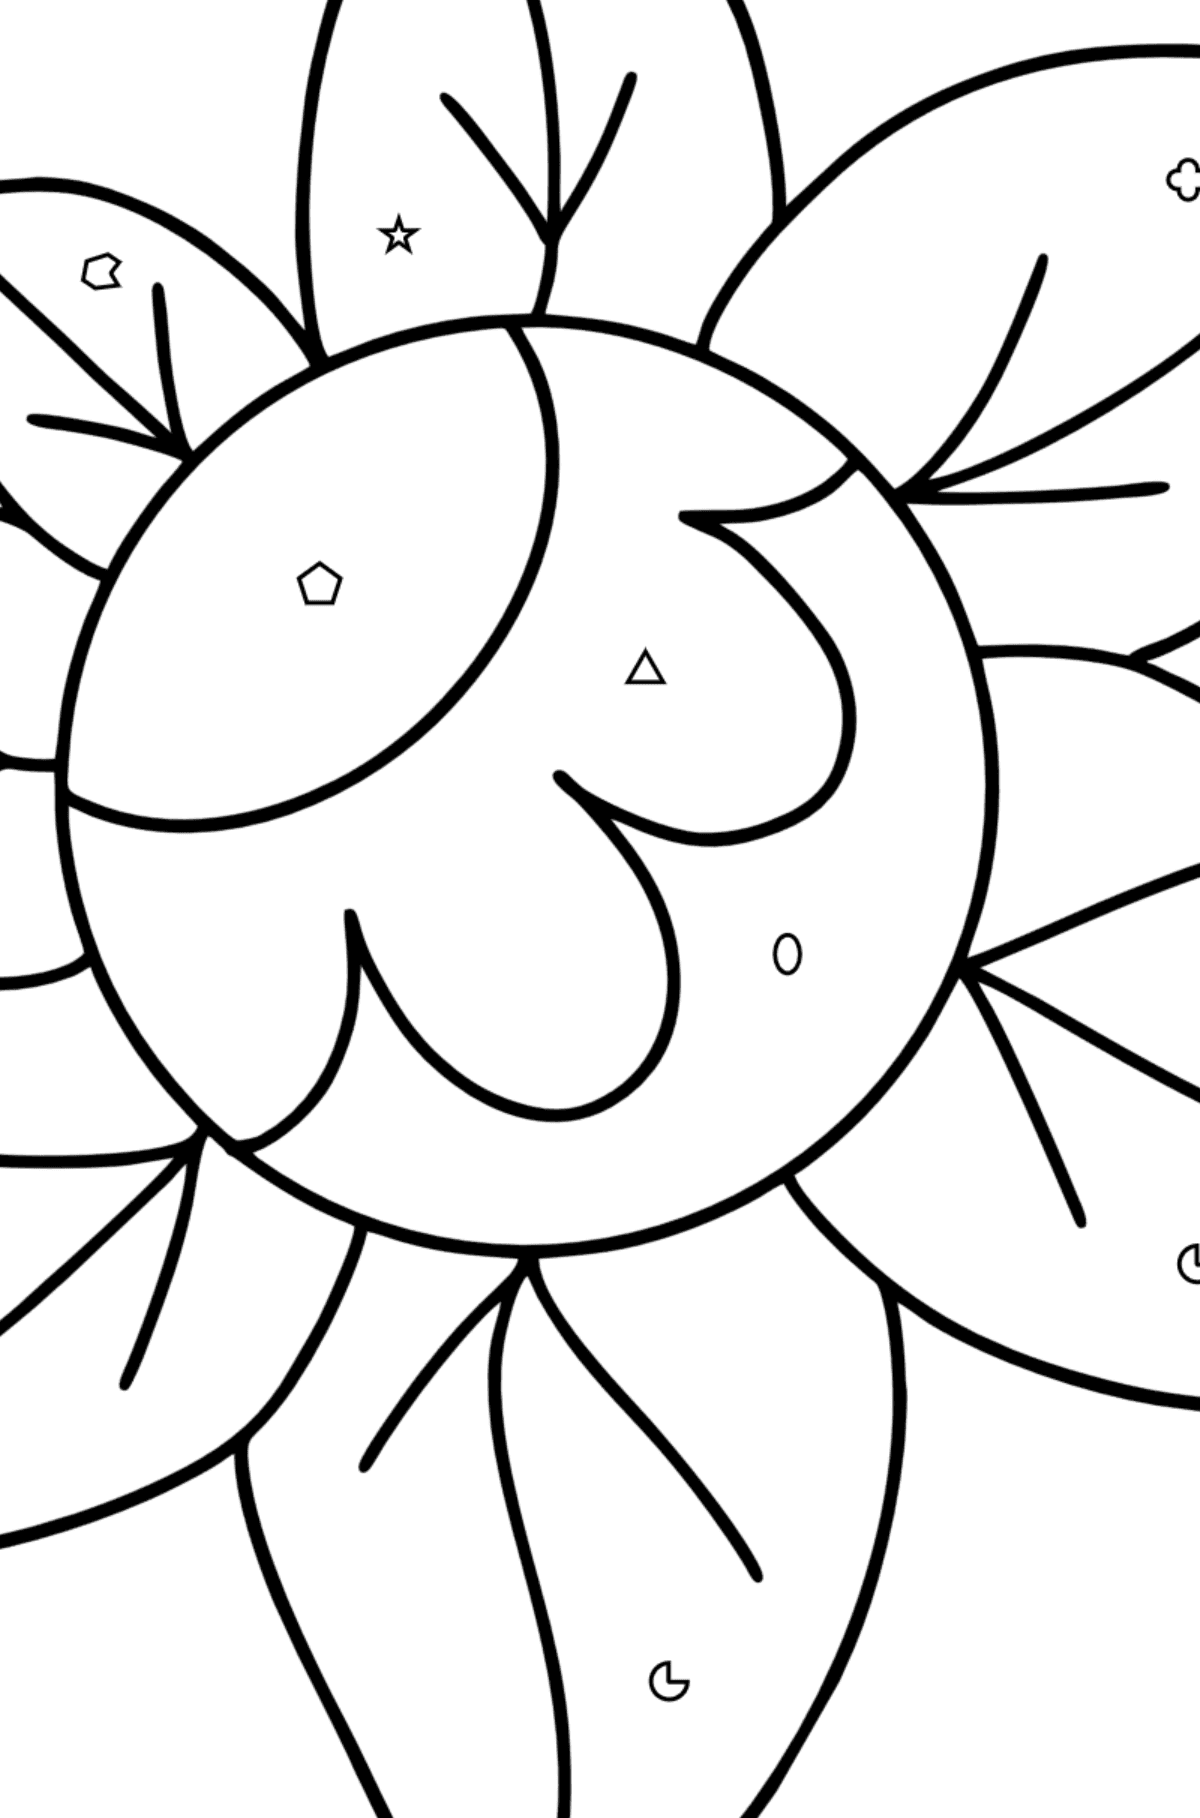 Zentangle Art flower coloring page - Coloring by Geometric Shapes for Kids